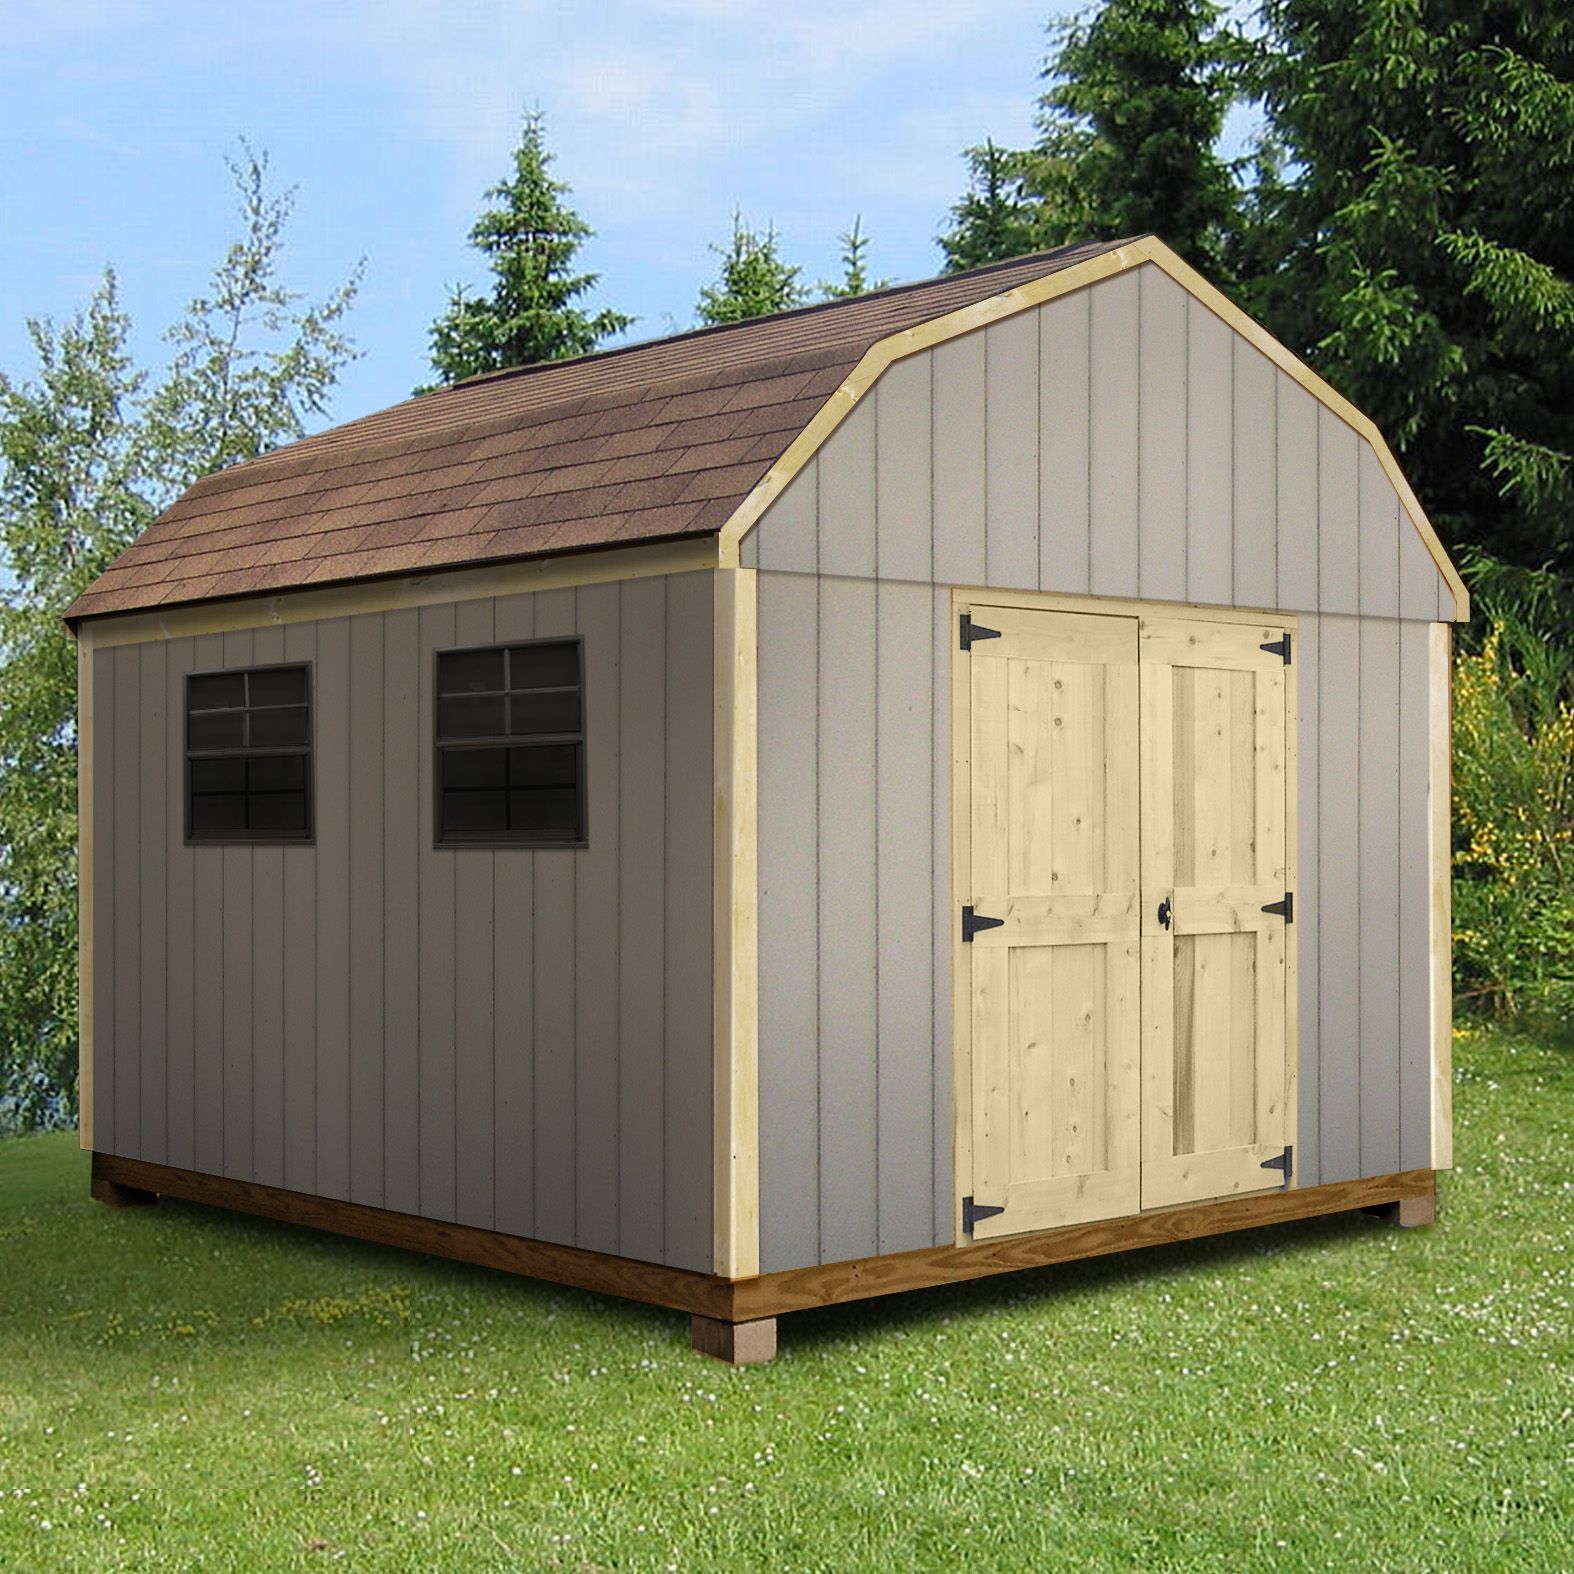 T0812SB Smart Siding Barn (8 ft. x 12 ft.) - Professional Installation Included